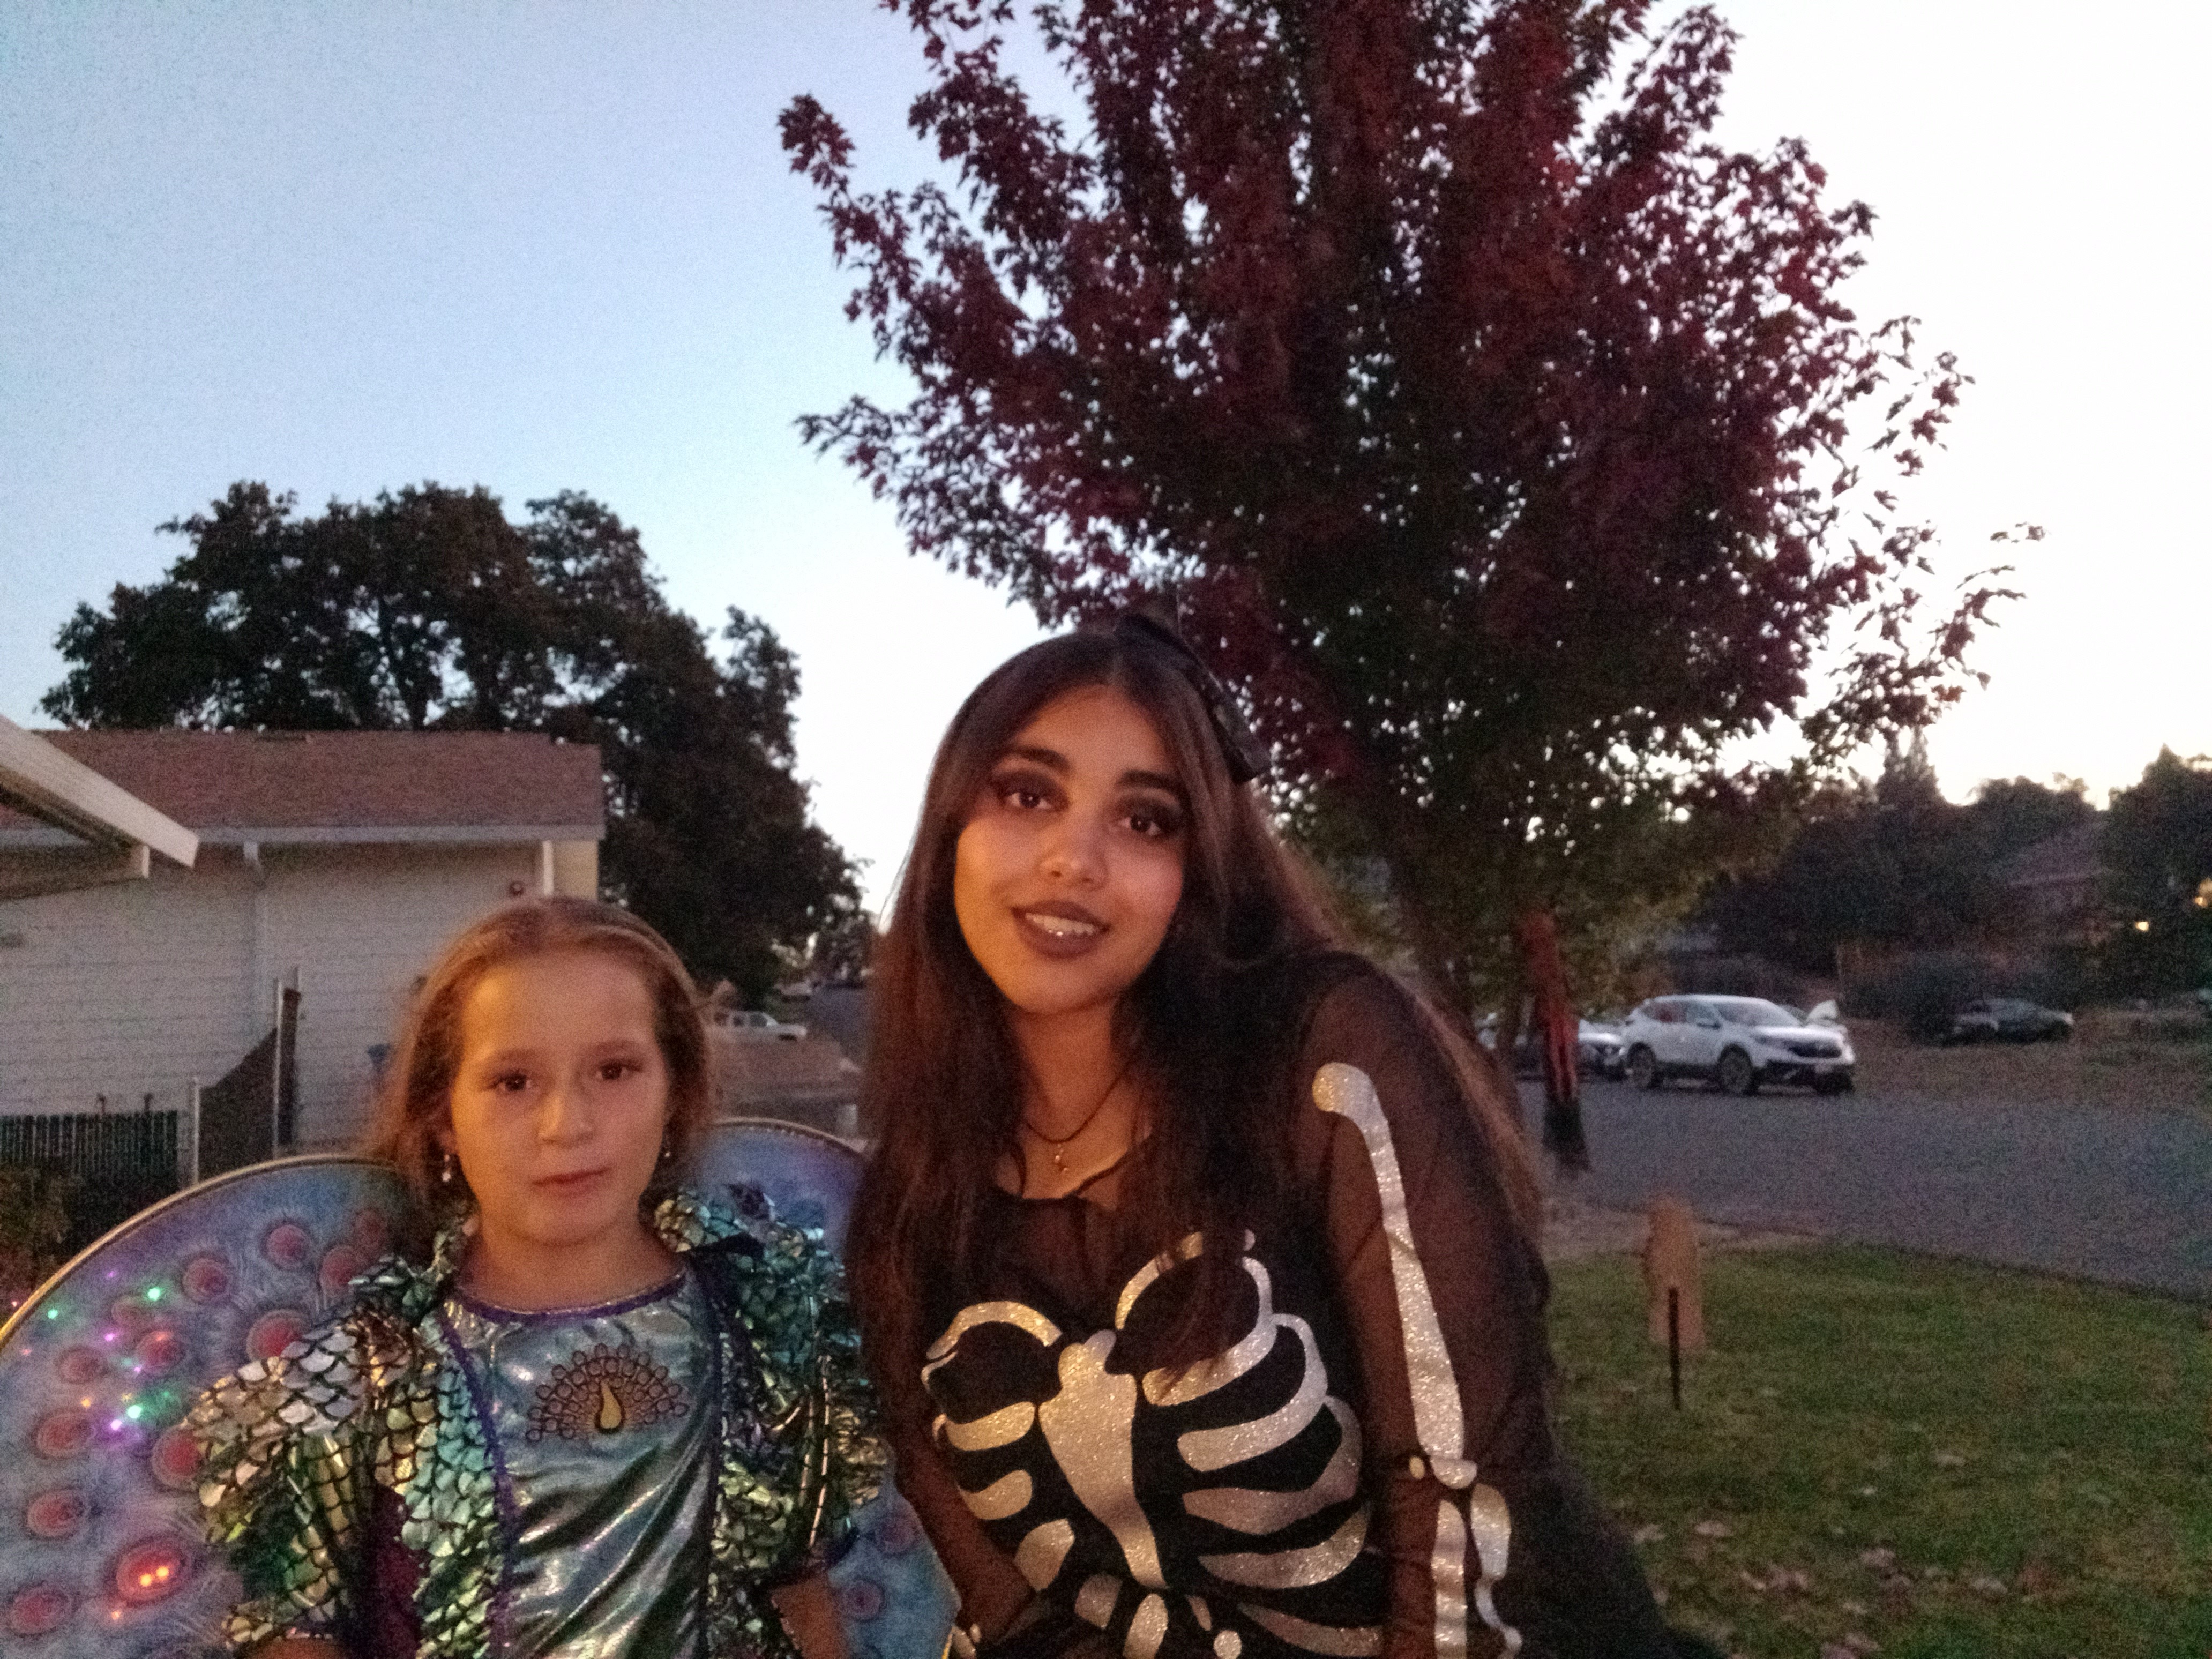 YES student standing next to host sister dressed up as a skeleton on Halloween.